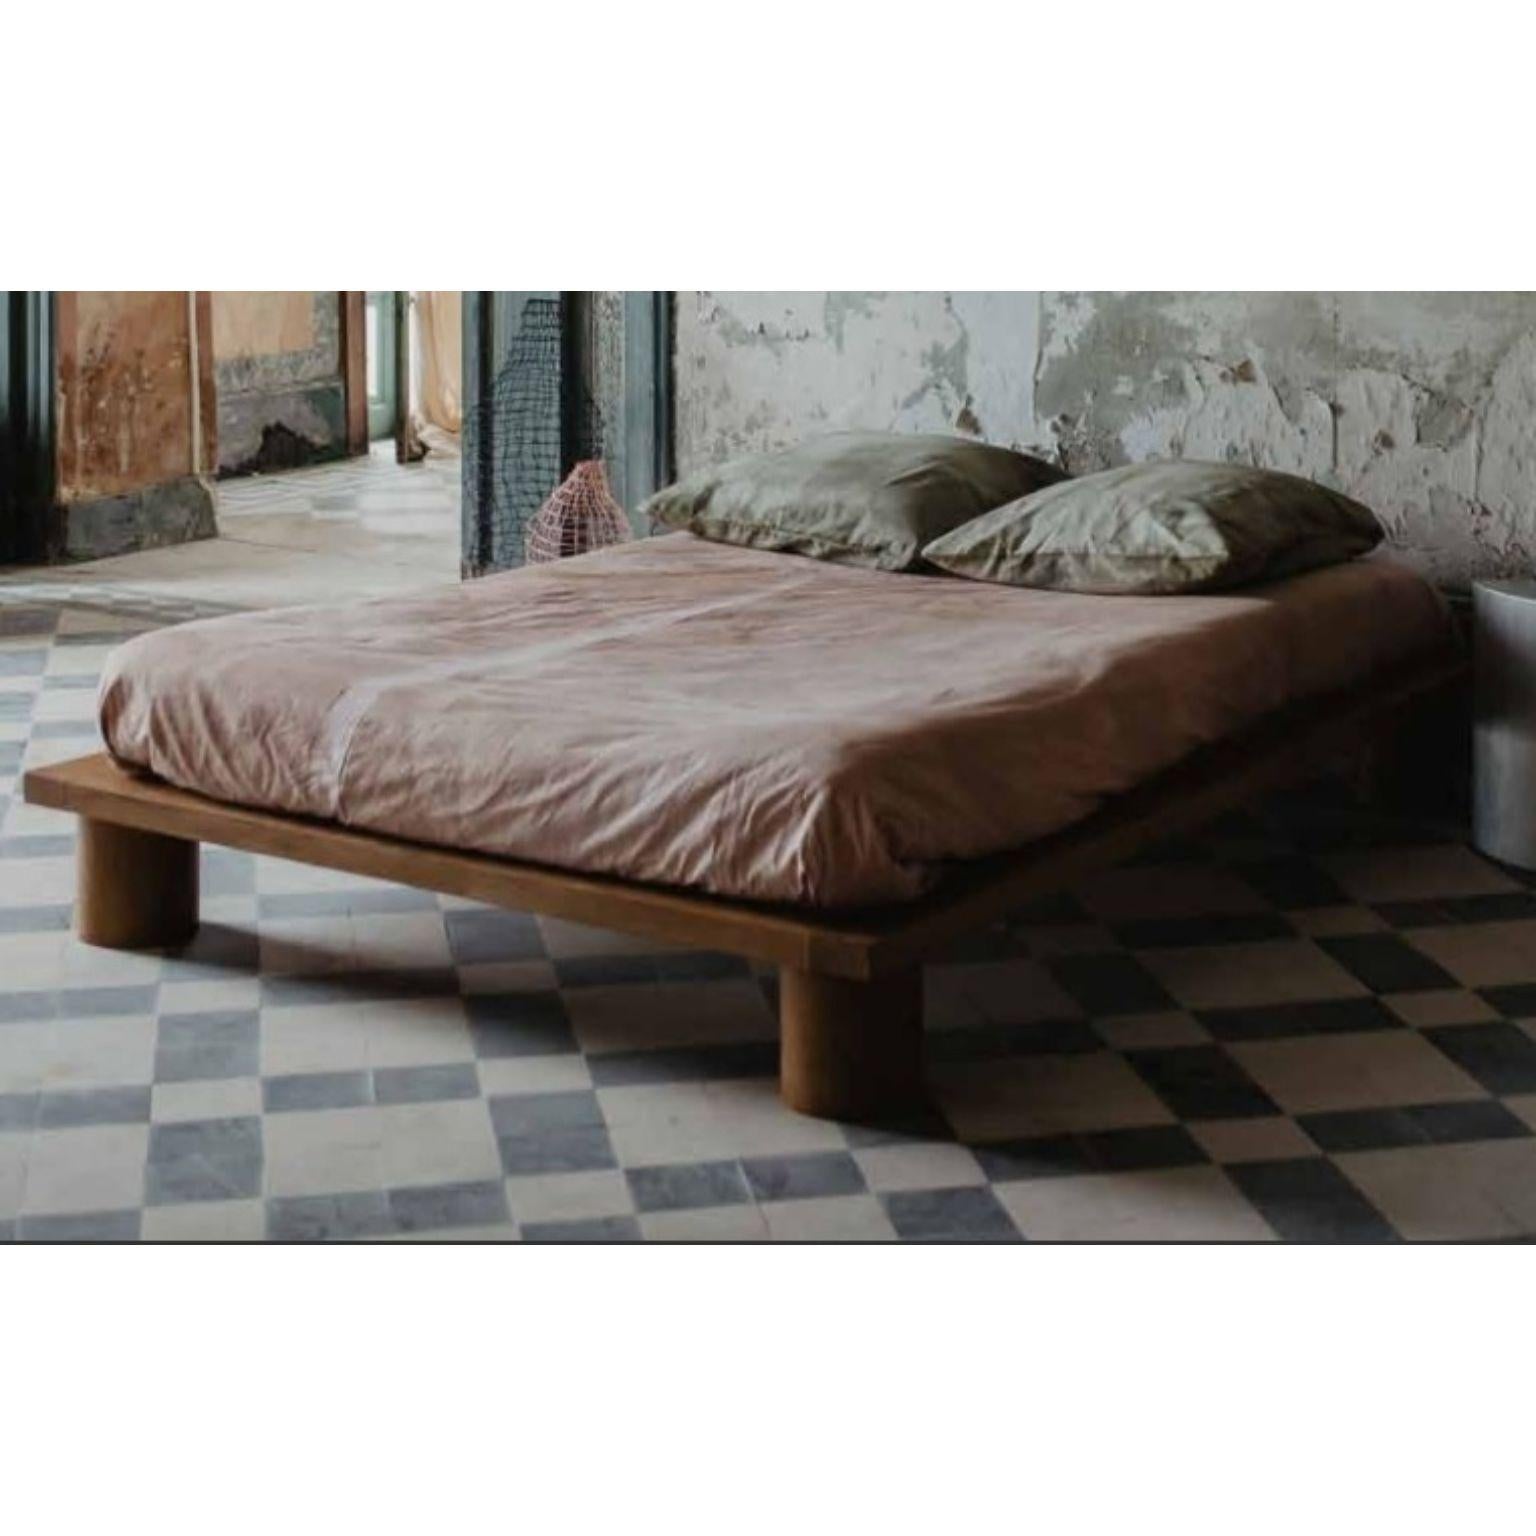 Solid Oak Big Bed by Mylene Niedzialkowski
Dimensions: L 160 x W 200.
Materials: Solid oak wood.

A solid oak bed with turned legs, available in several sizes and made entirely handmade in the South West. Made from solid oak from French eco-managed